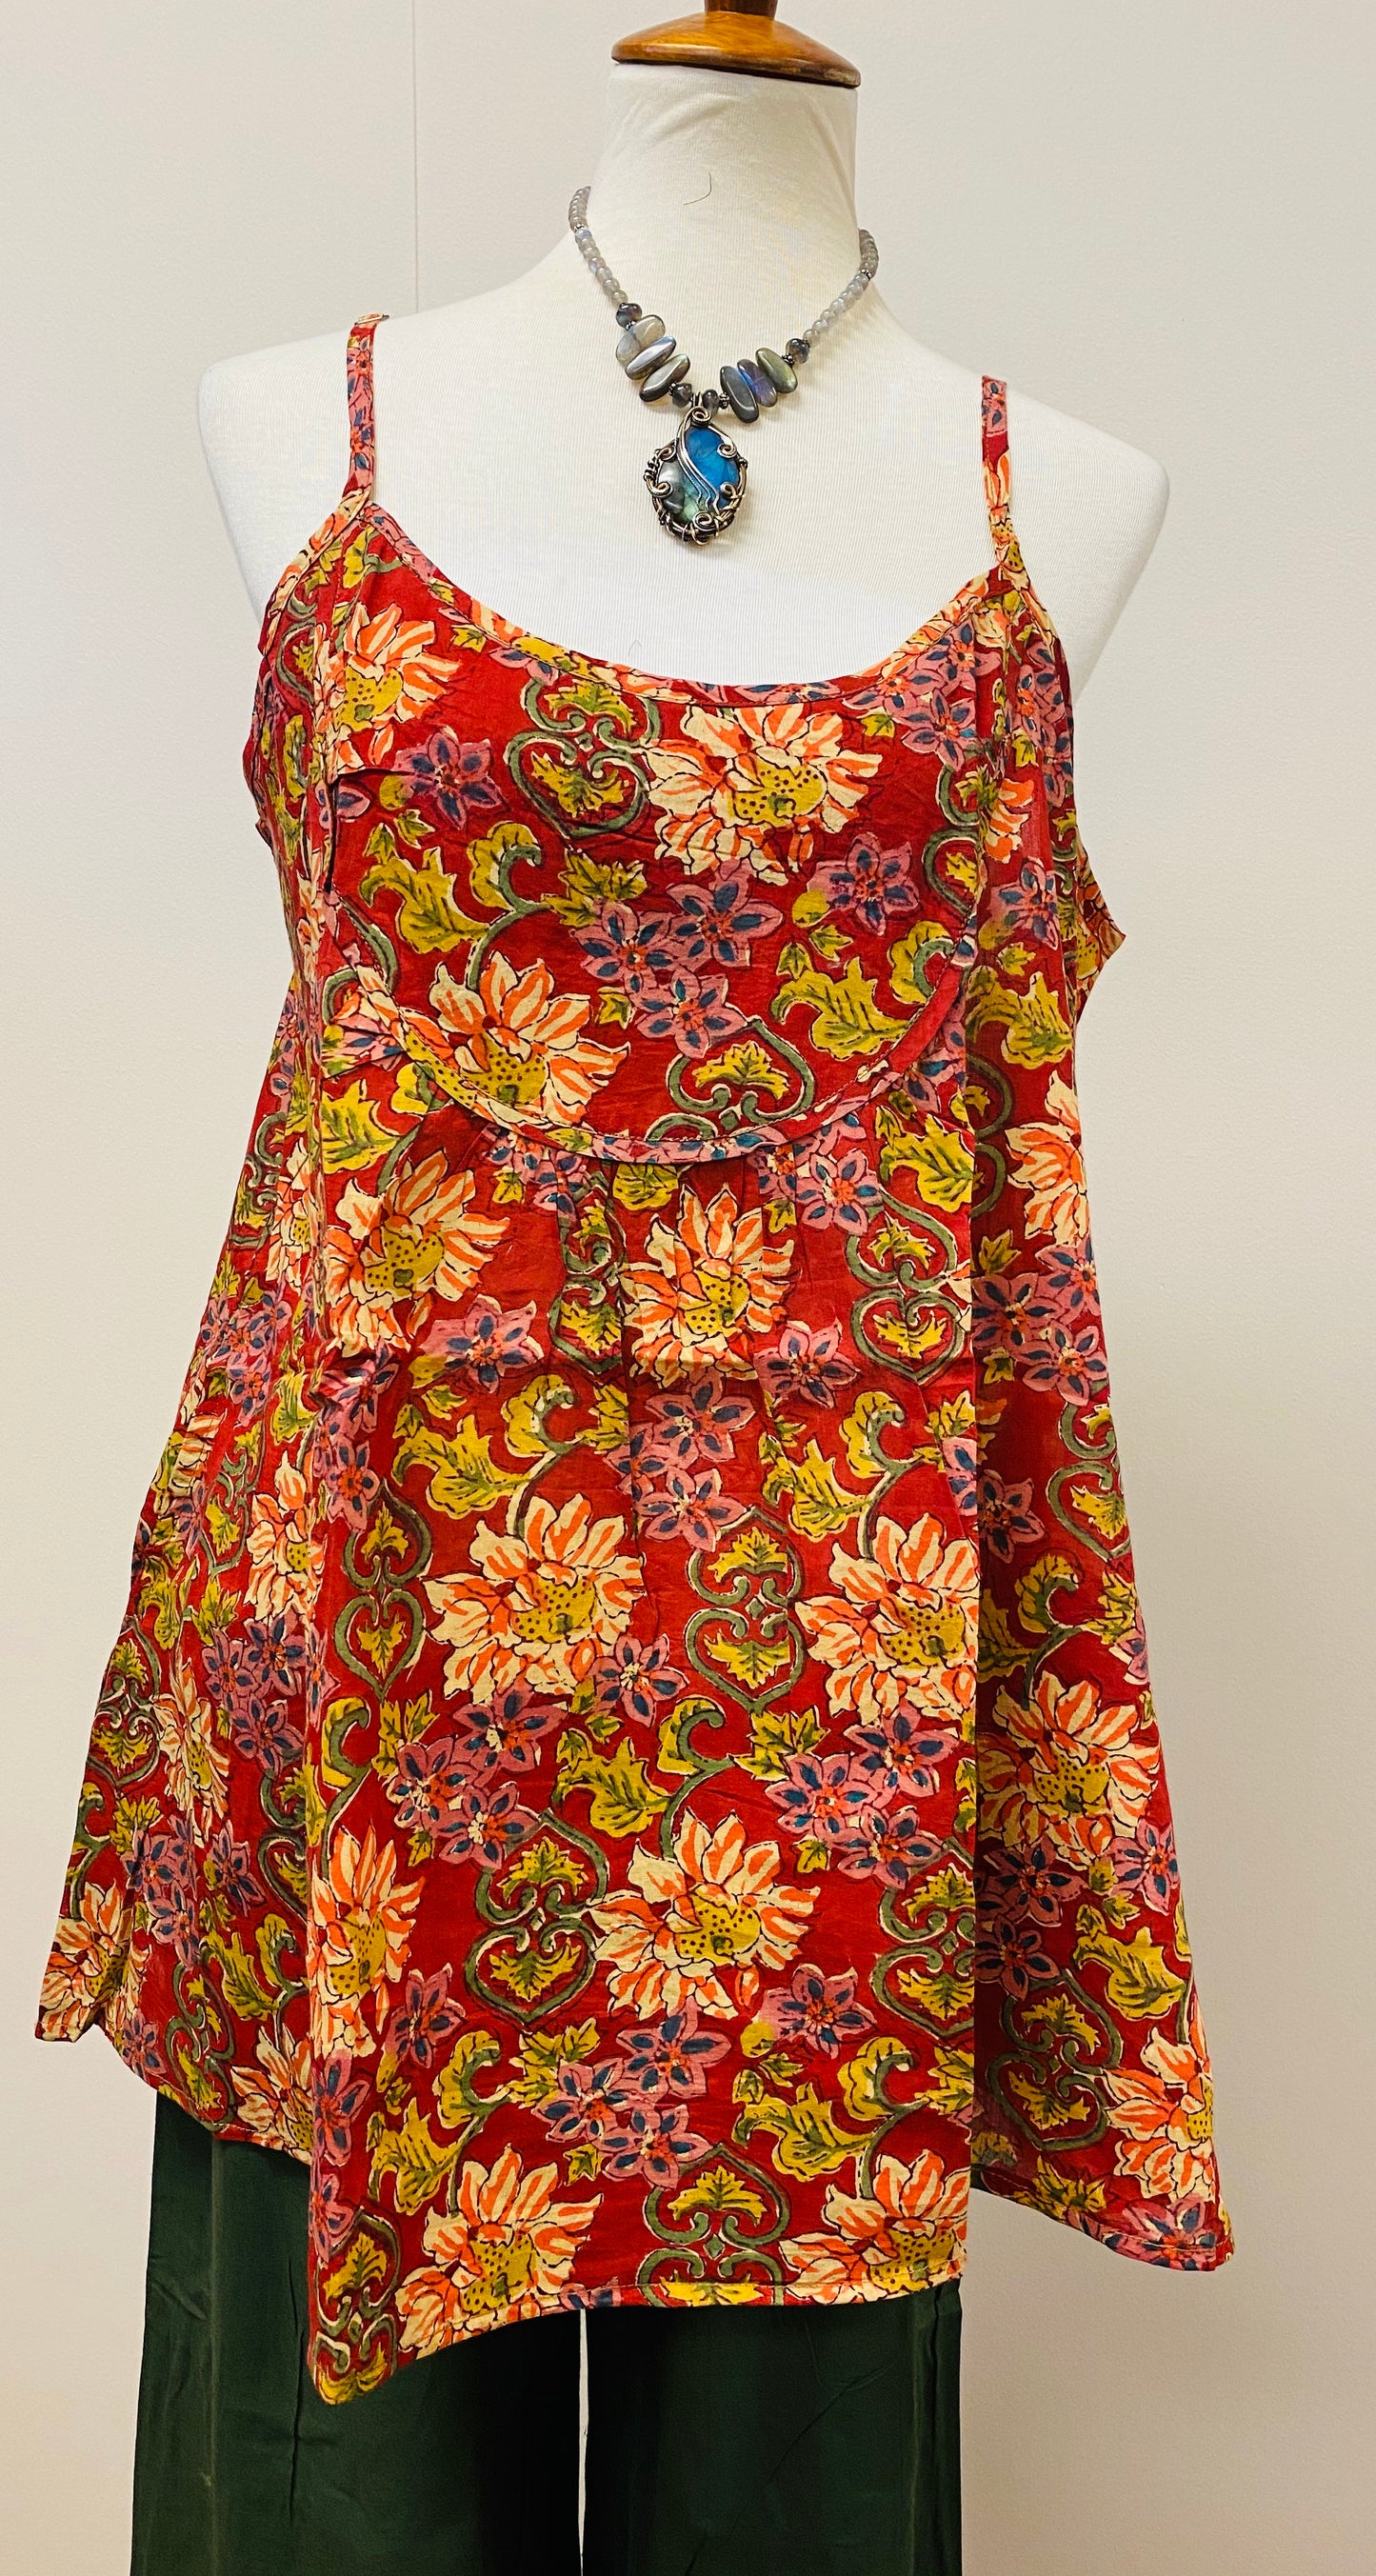 Hand Block Print Cotton Tank Top with Pockets! - 4 Patterns Available